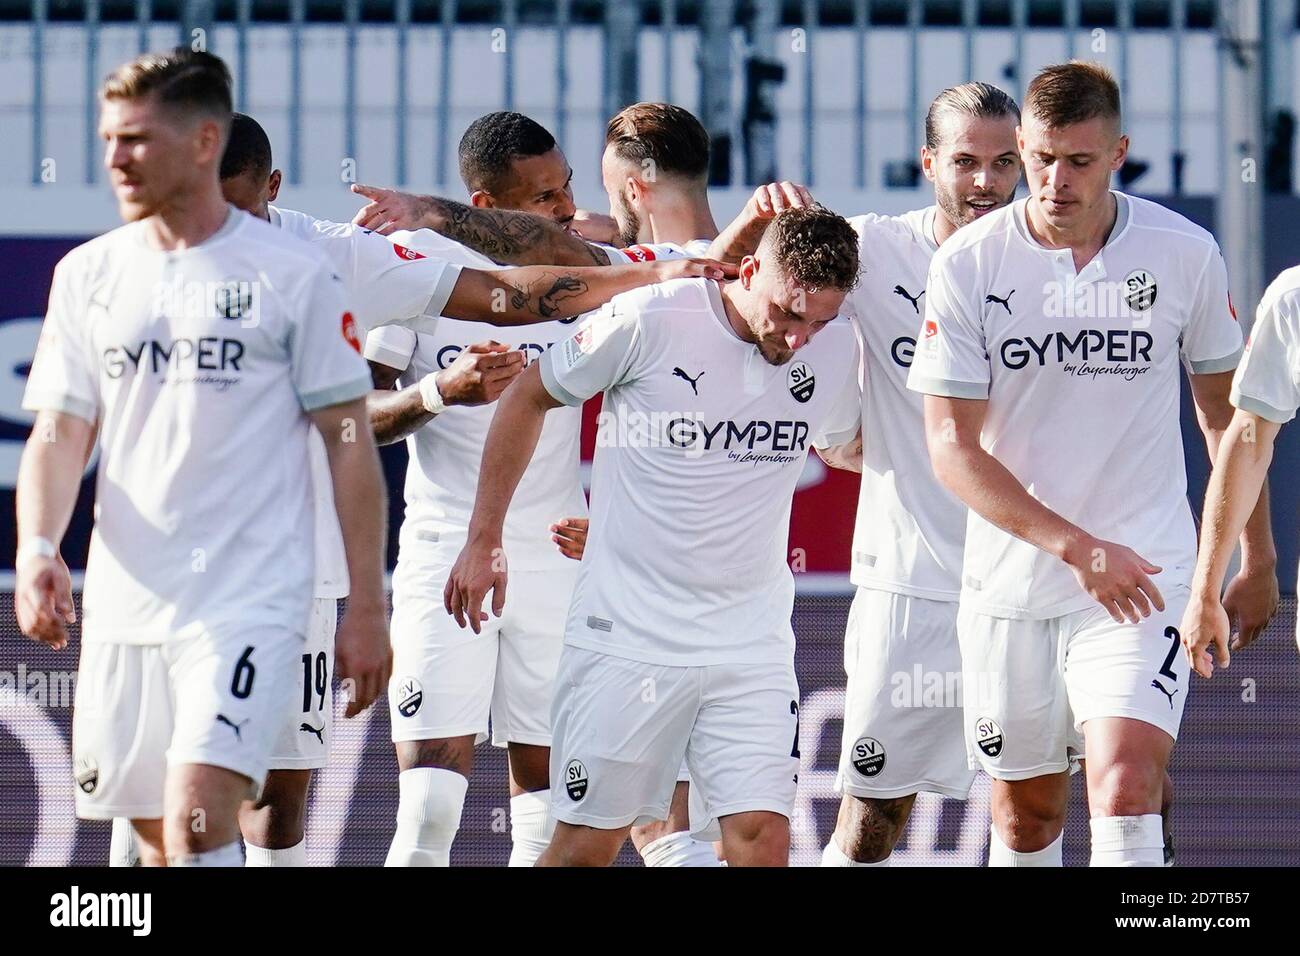 Sandhausen, Germany. 25th Oct, 2020. Football: 2nd Bundesliga, SV Sandhausen - SC Paderborn 07, 5th matchday, at the Hardtwaldstadion. Sandhausen's goal scorer Robin Scheu (M) cheers with teammates about the goal for 1:1. Credit: Uwe Anspach/dpa - IMPORTANT NOTE: In accordance with the regulations of the DFL Deutsche Fußball Liga and the DFB Deutscher Fußball-Bund, it is prohibited to exploit or have exploited in the stadium and/or from the game taken photographs in the form of sequence images and/or video-like photo series./dpa/Alamy Live News Stock Photo